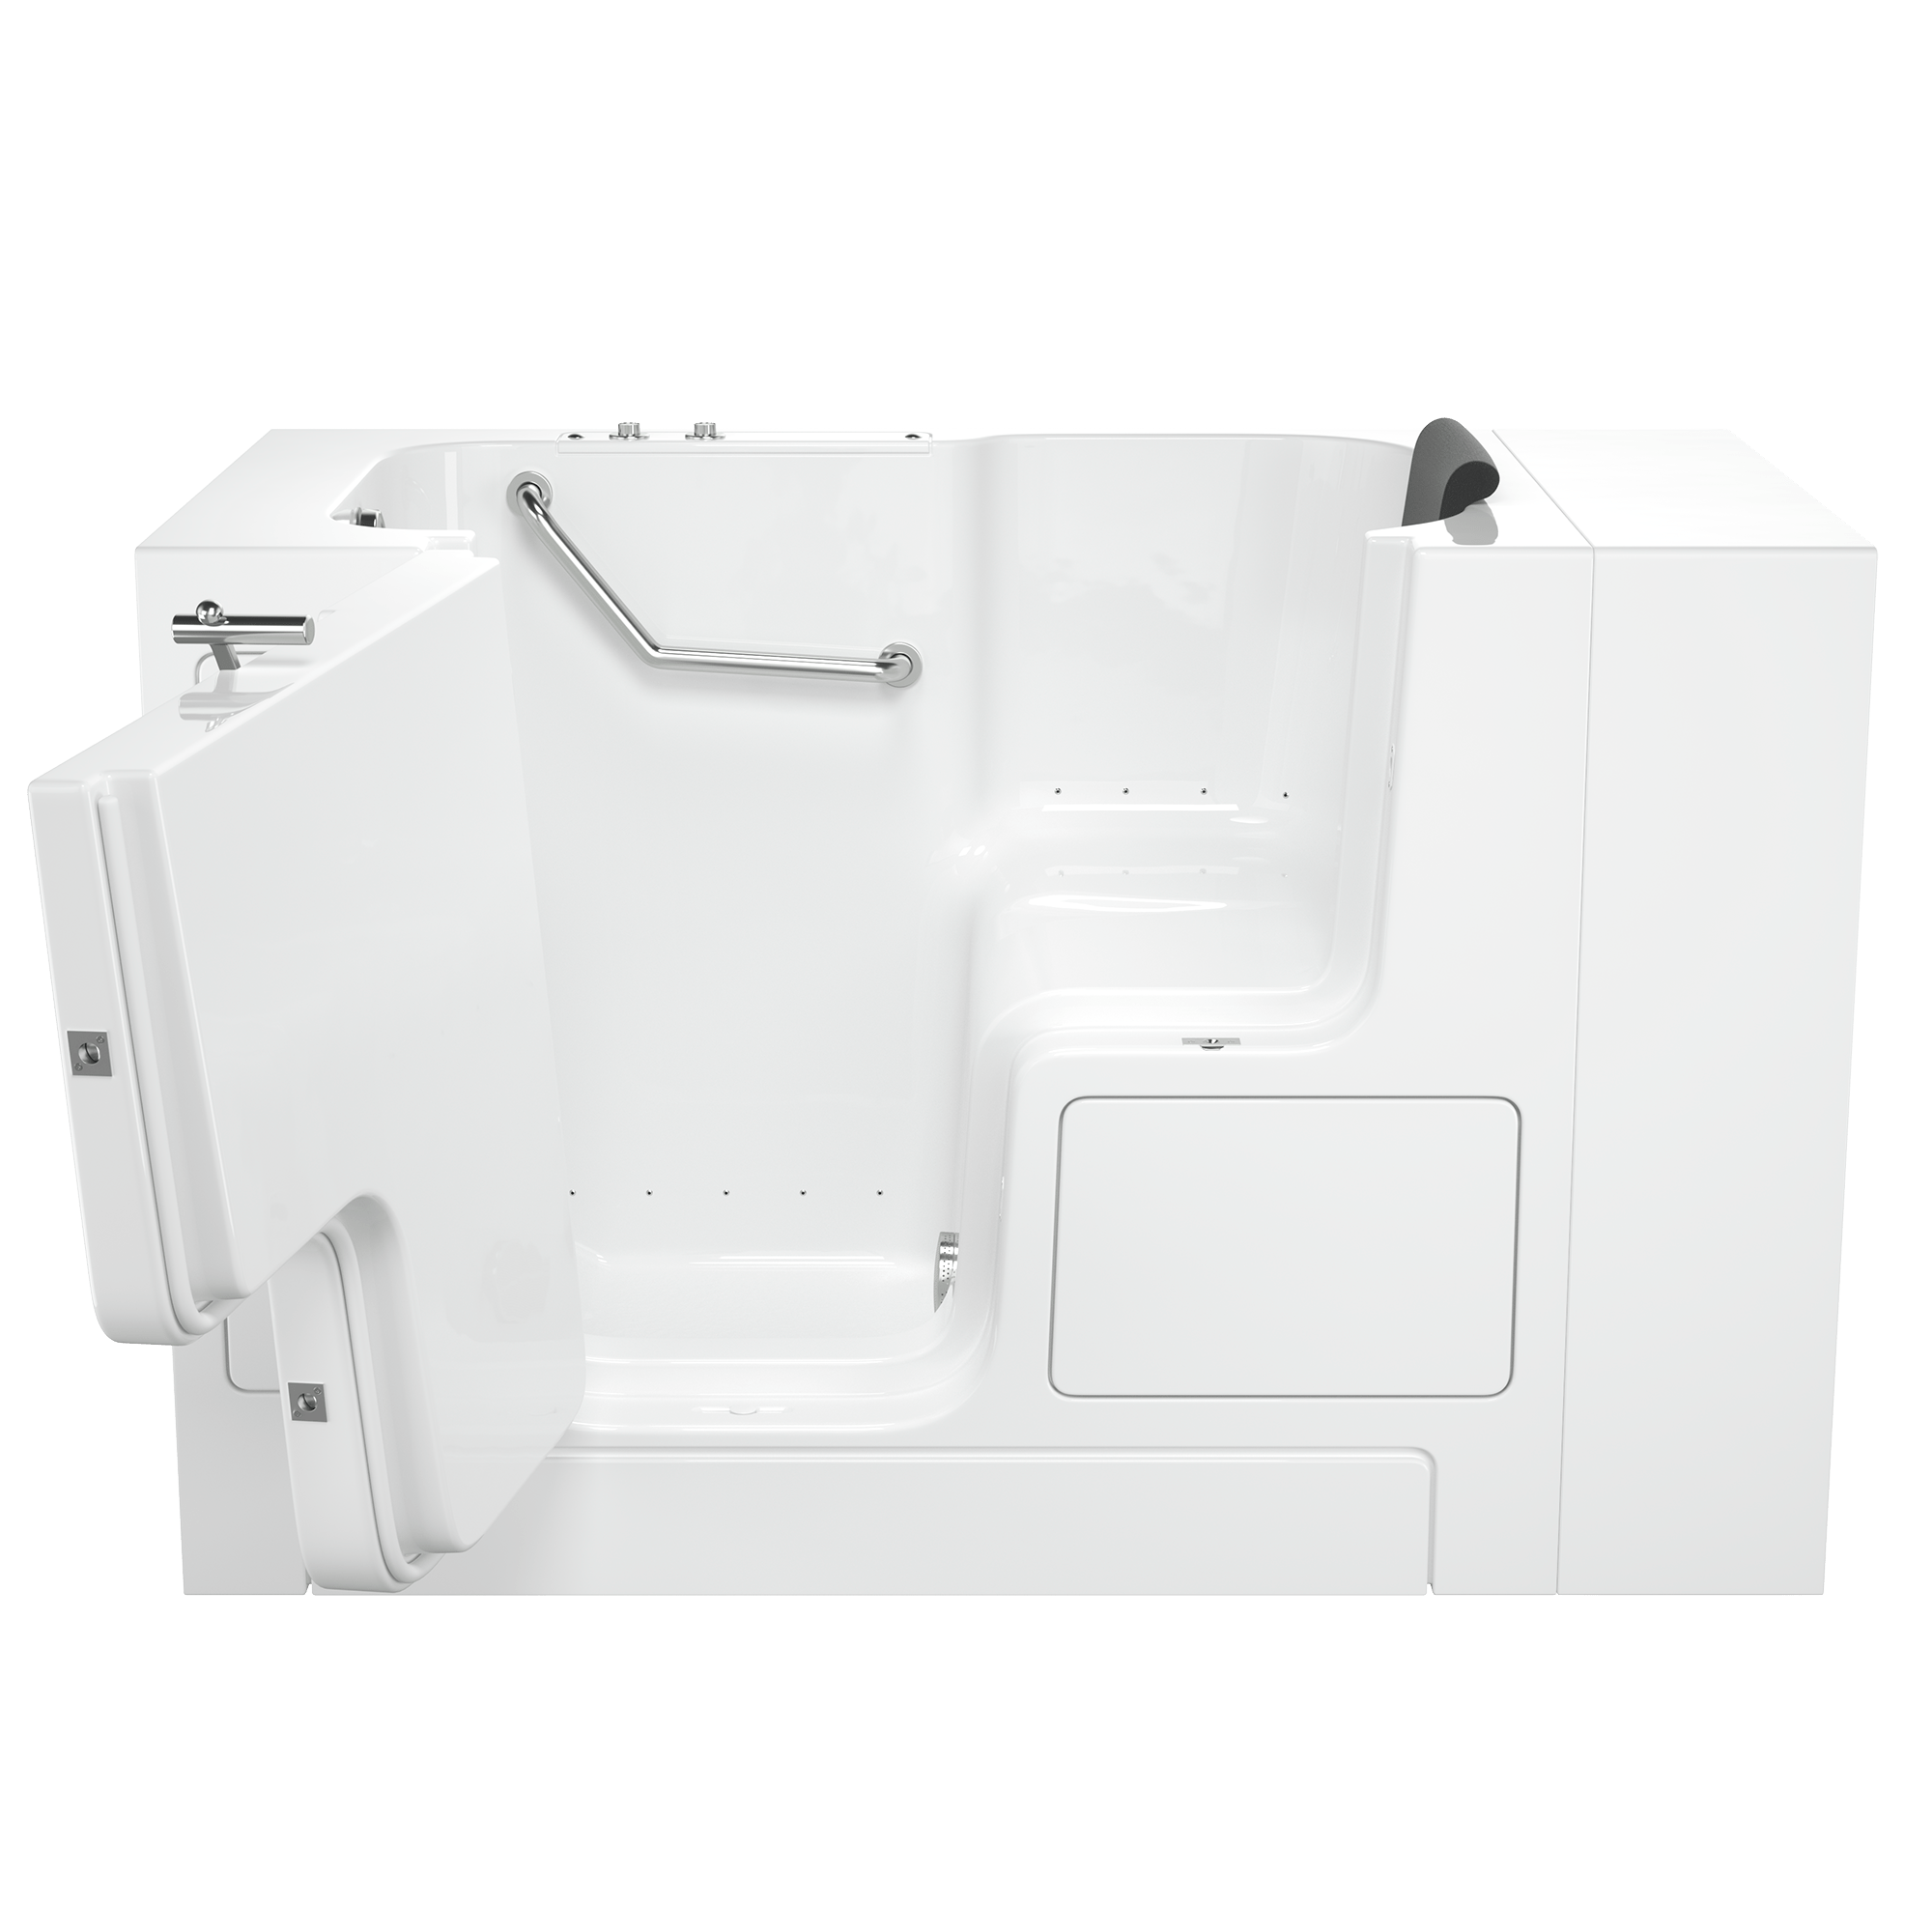 Gelcoat Premium Series 32 x 52  Inch Walk in Tub With Air Spa System   Left Hand Drain WIB WHITE